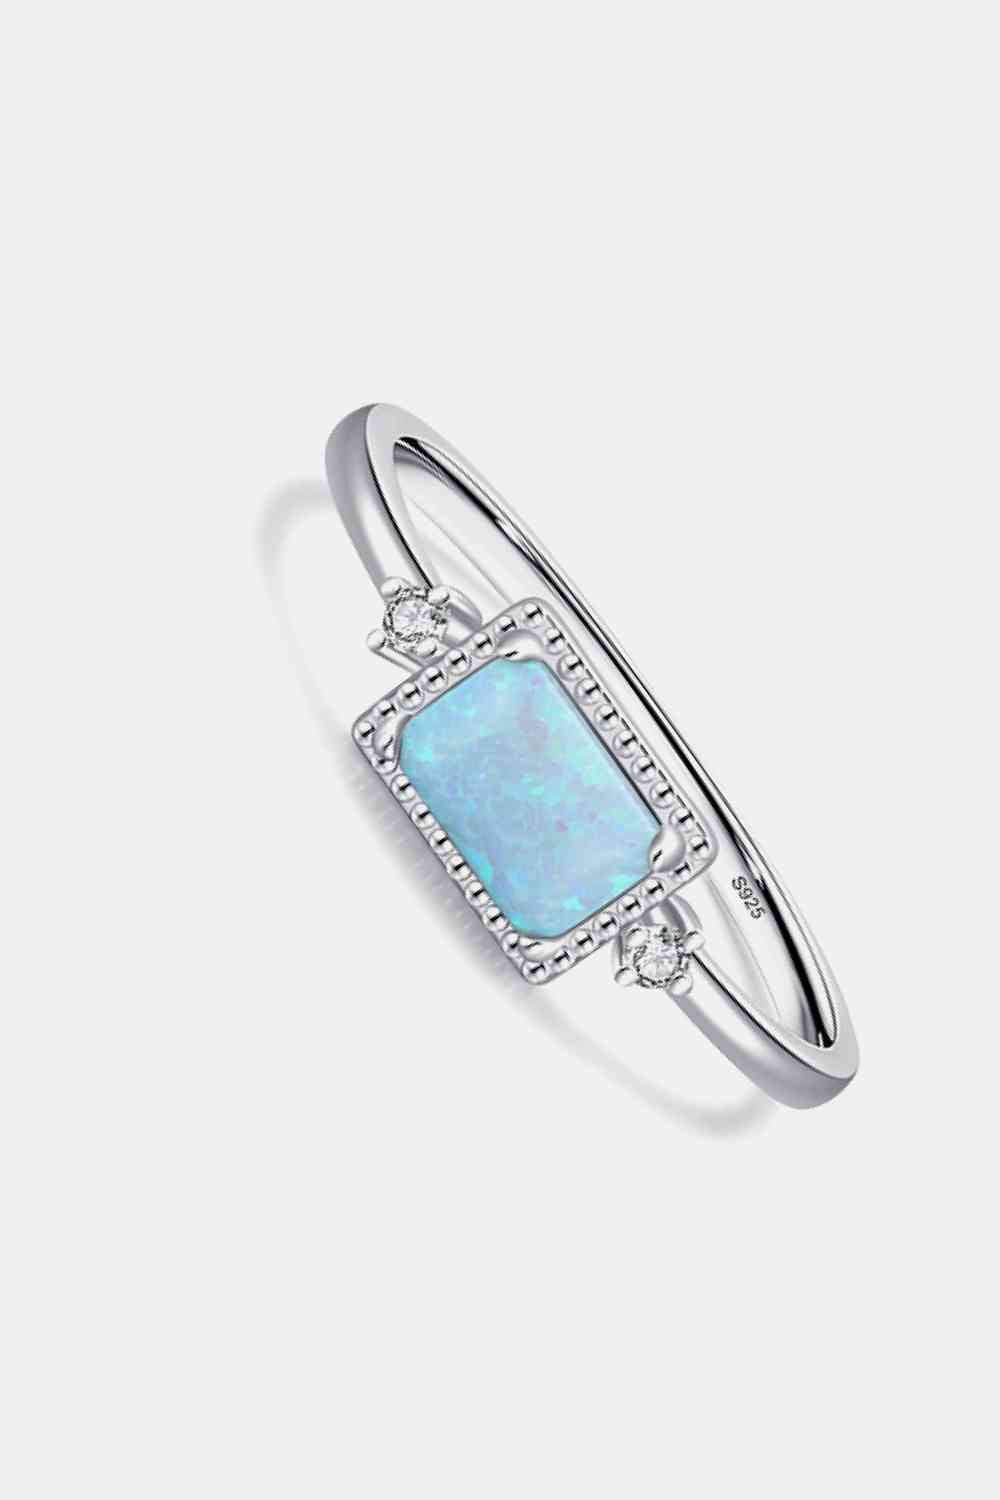 Emerald Cut Opal Ring with Zircon Accents